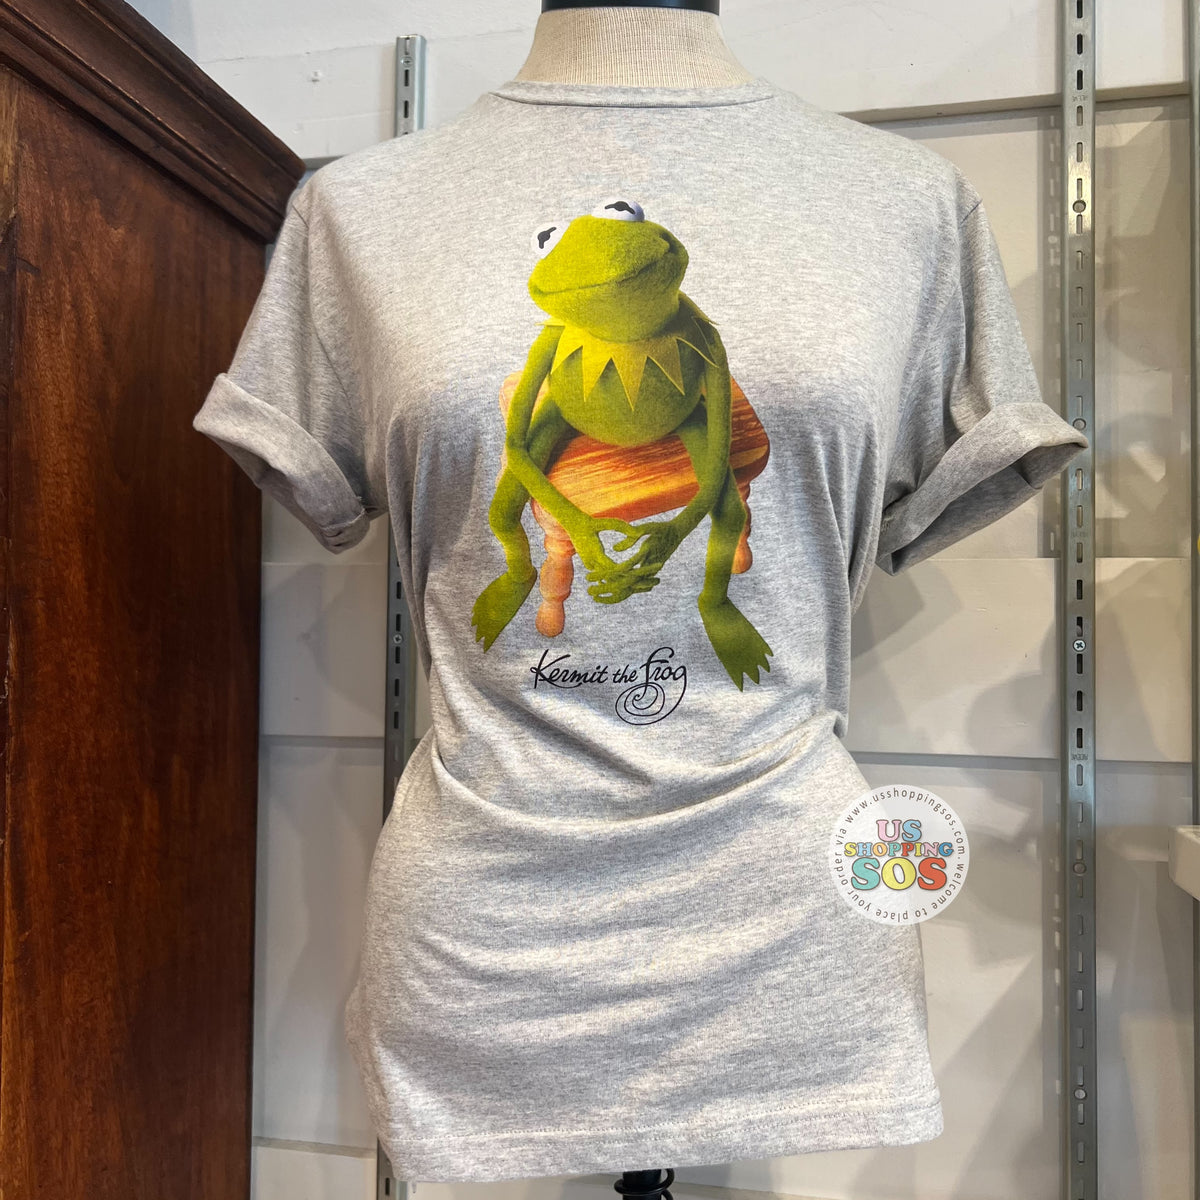 DLR - The Muppets Kermit the Frog Heather Grey Graphic T-shirt (Adult) —  USShoppingSOS